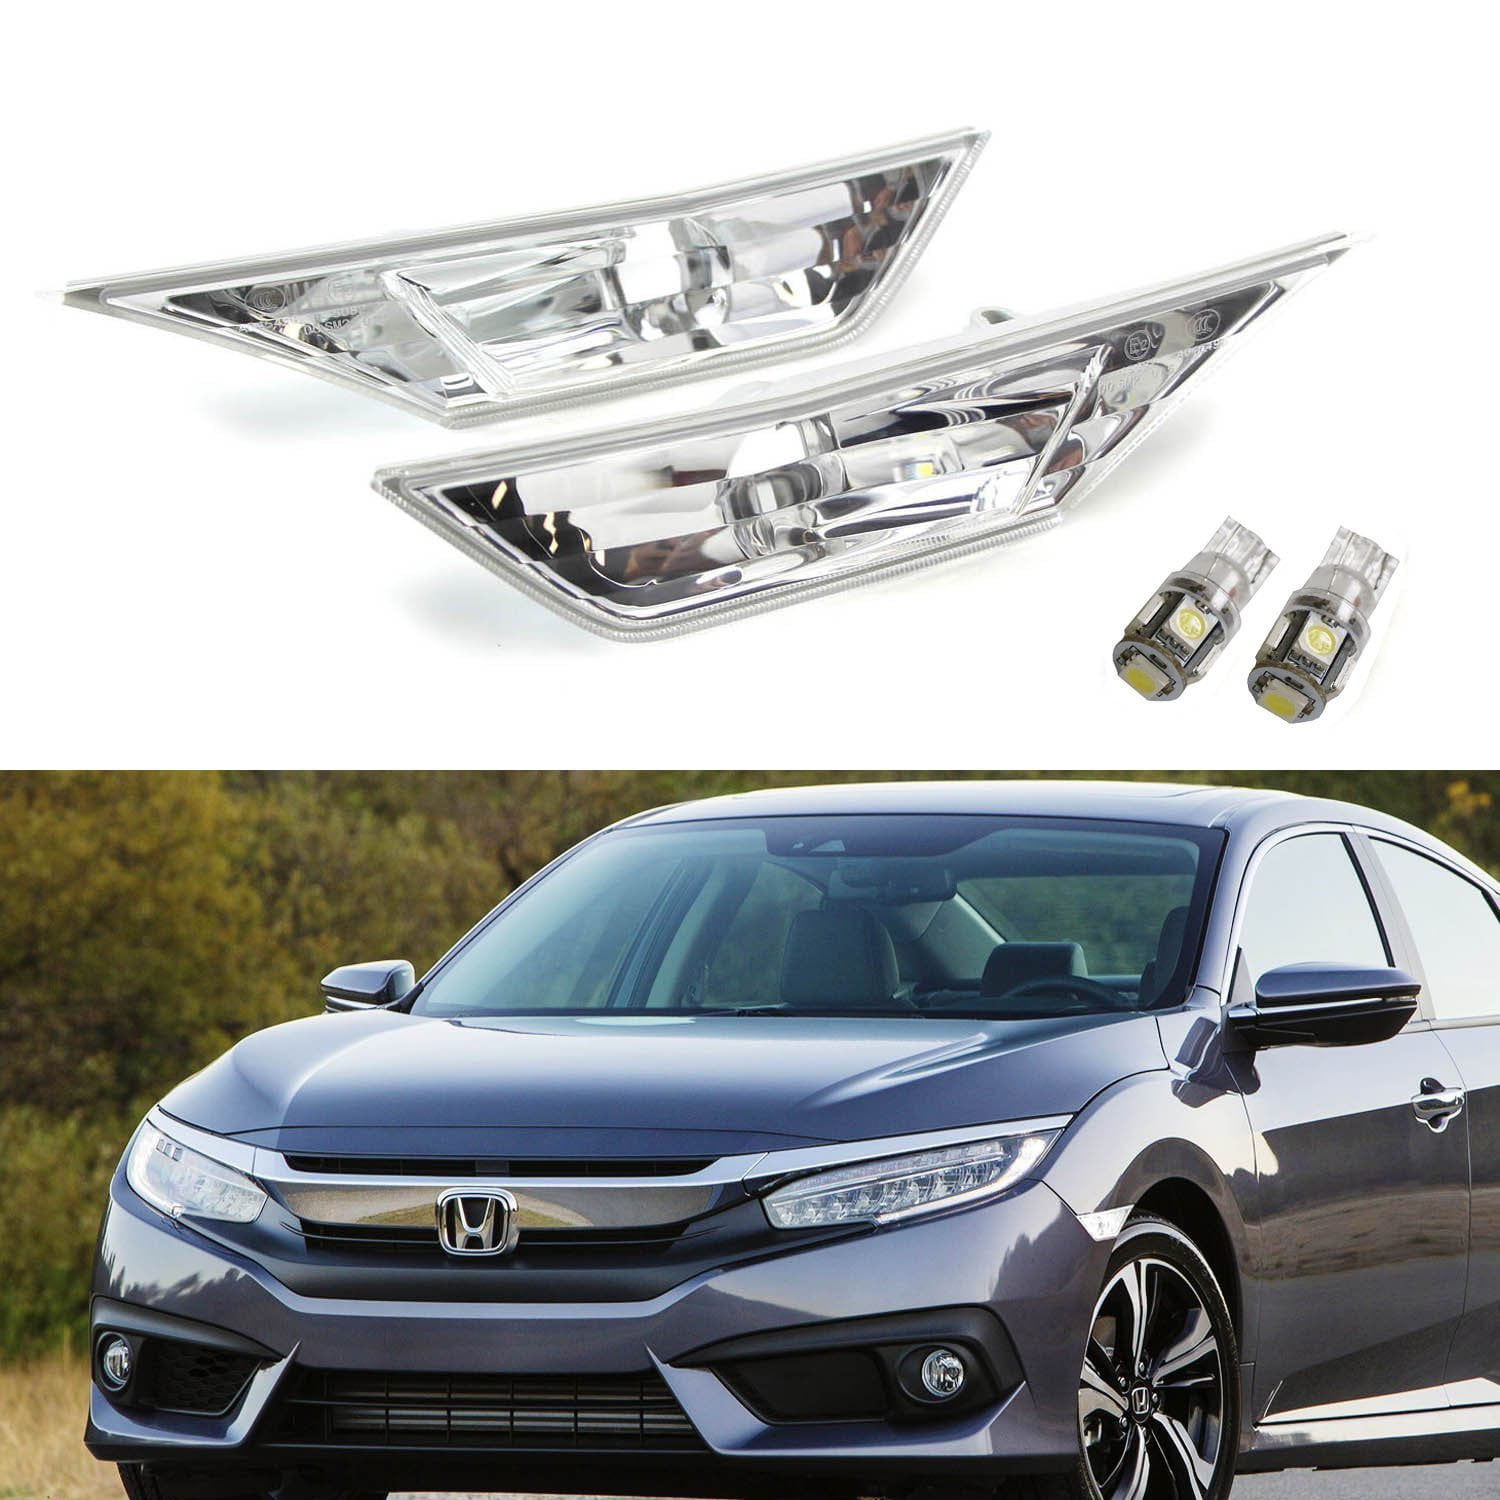 Replace OEM Amber Sidemarker Lamps iJDMTOY JDM Clear Lens Front Side Marker Light Lens Housings Compatible With 2016-up Honda Civic Sedan/Coupe/Hatchback 